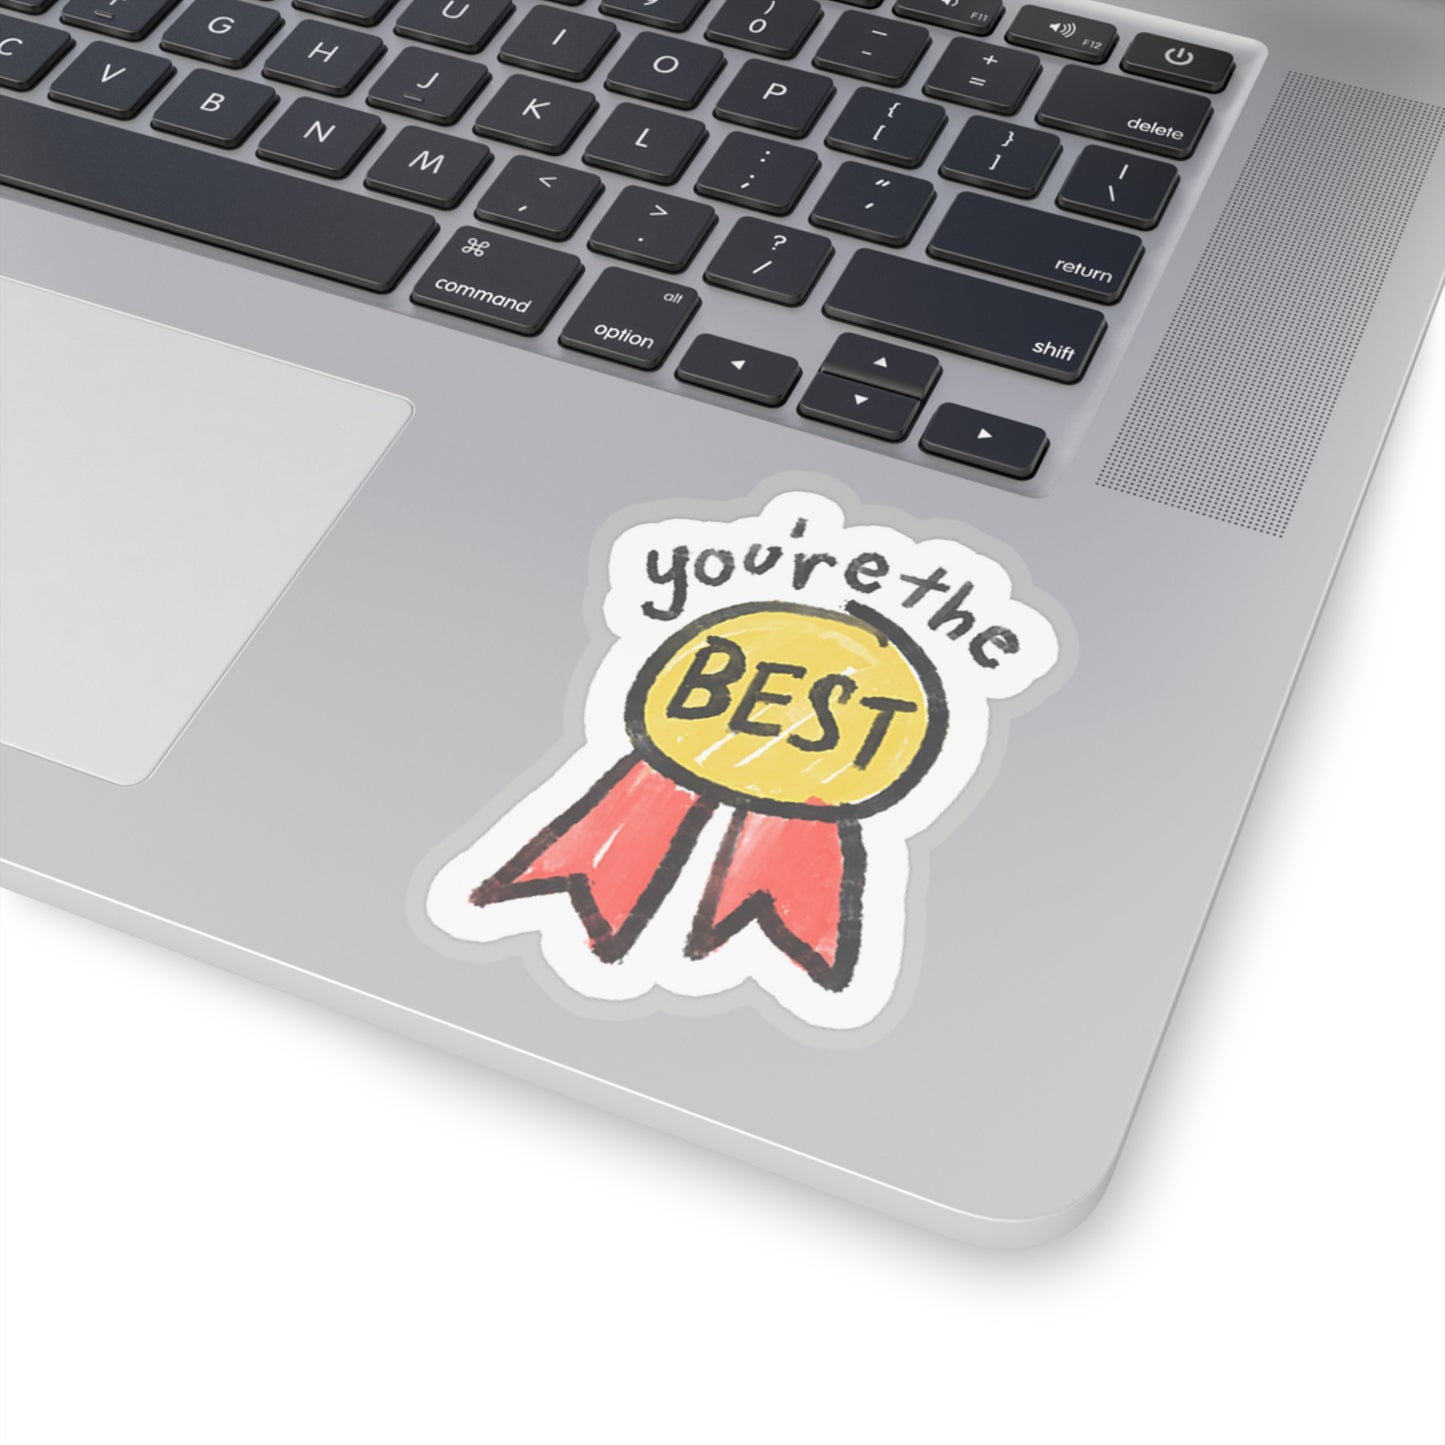 You're The Best Sticker